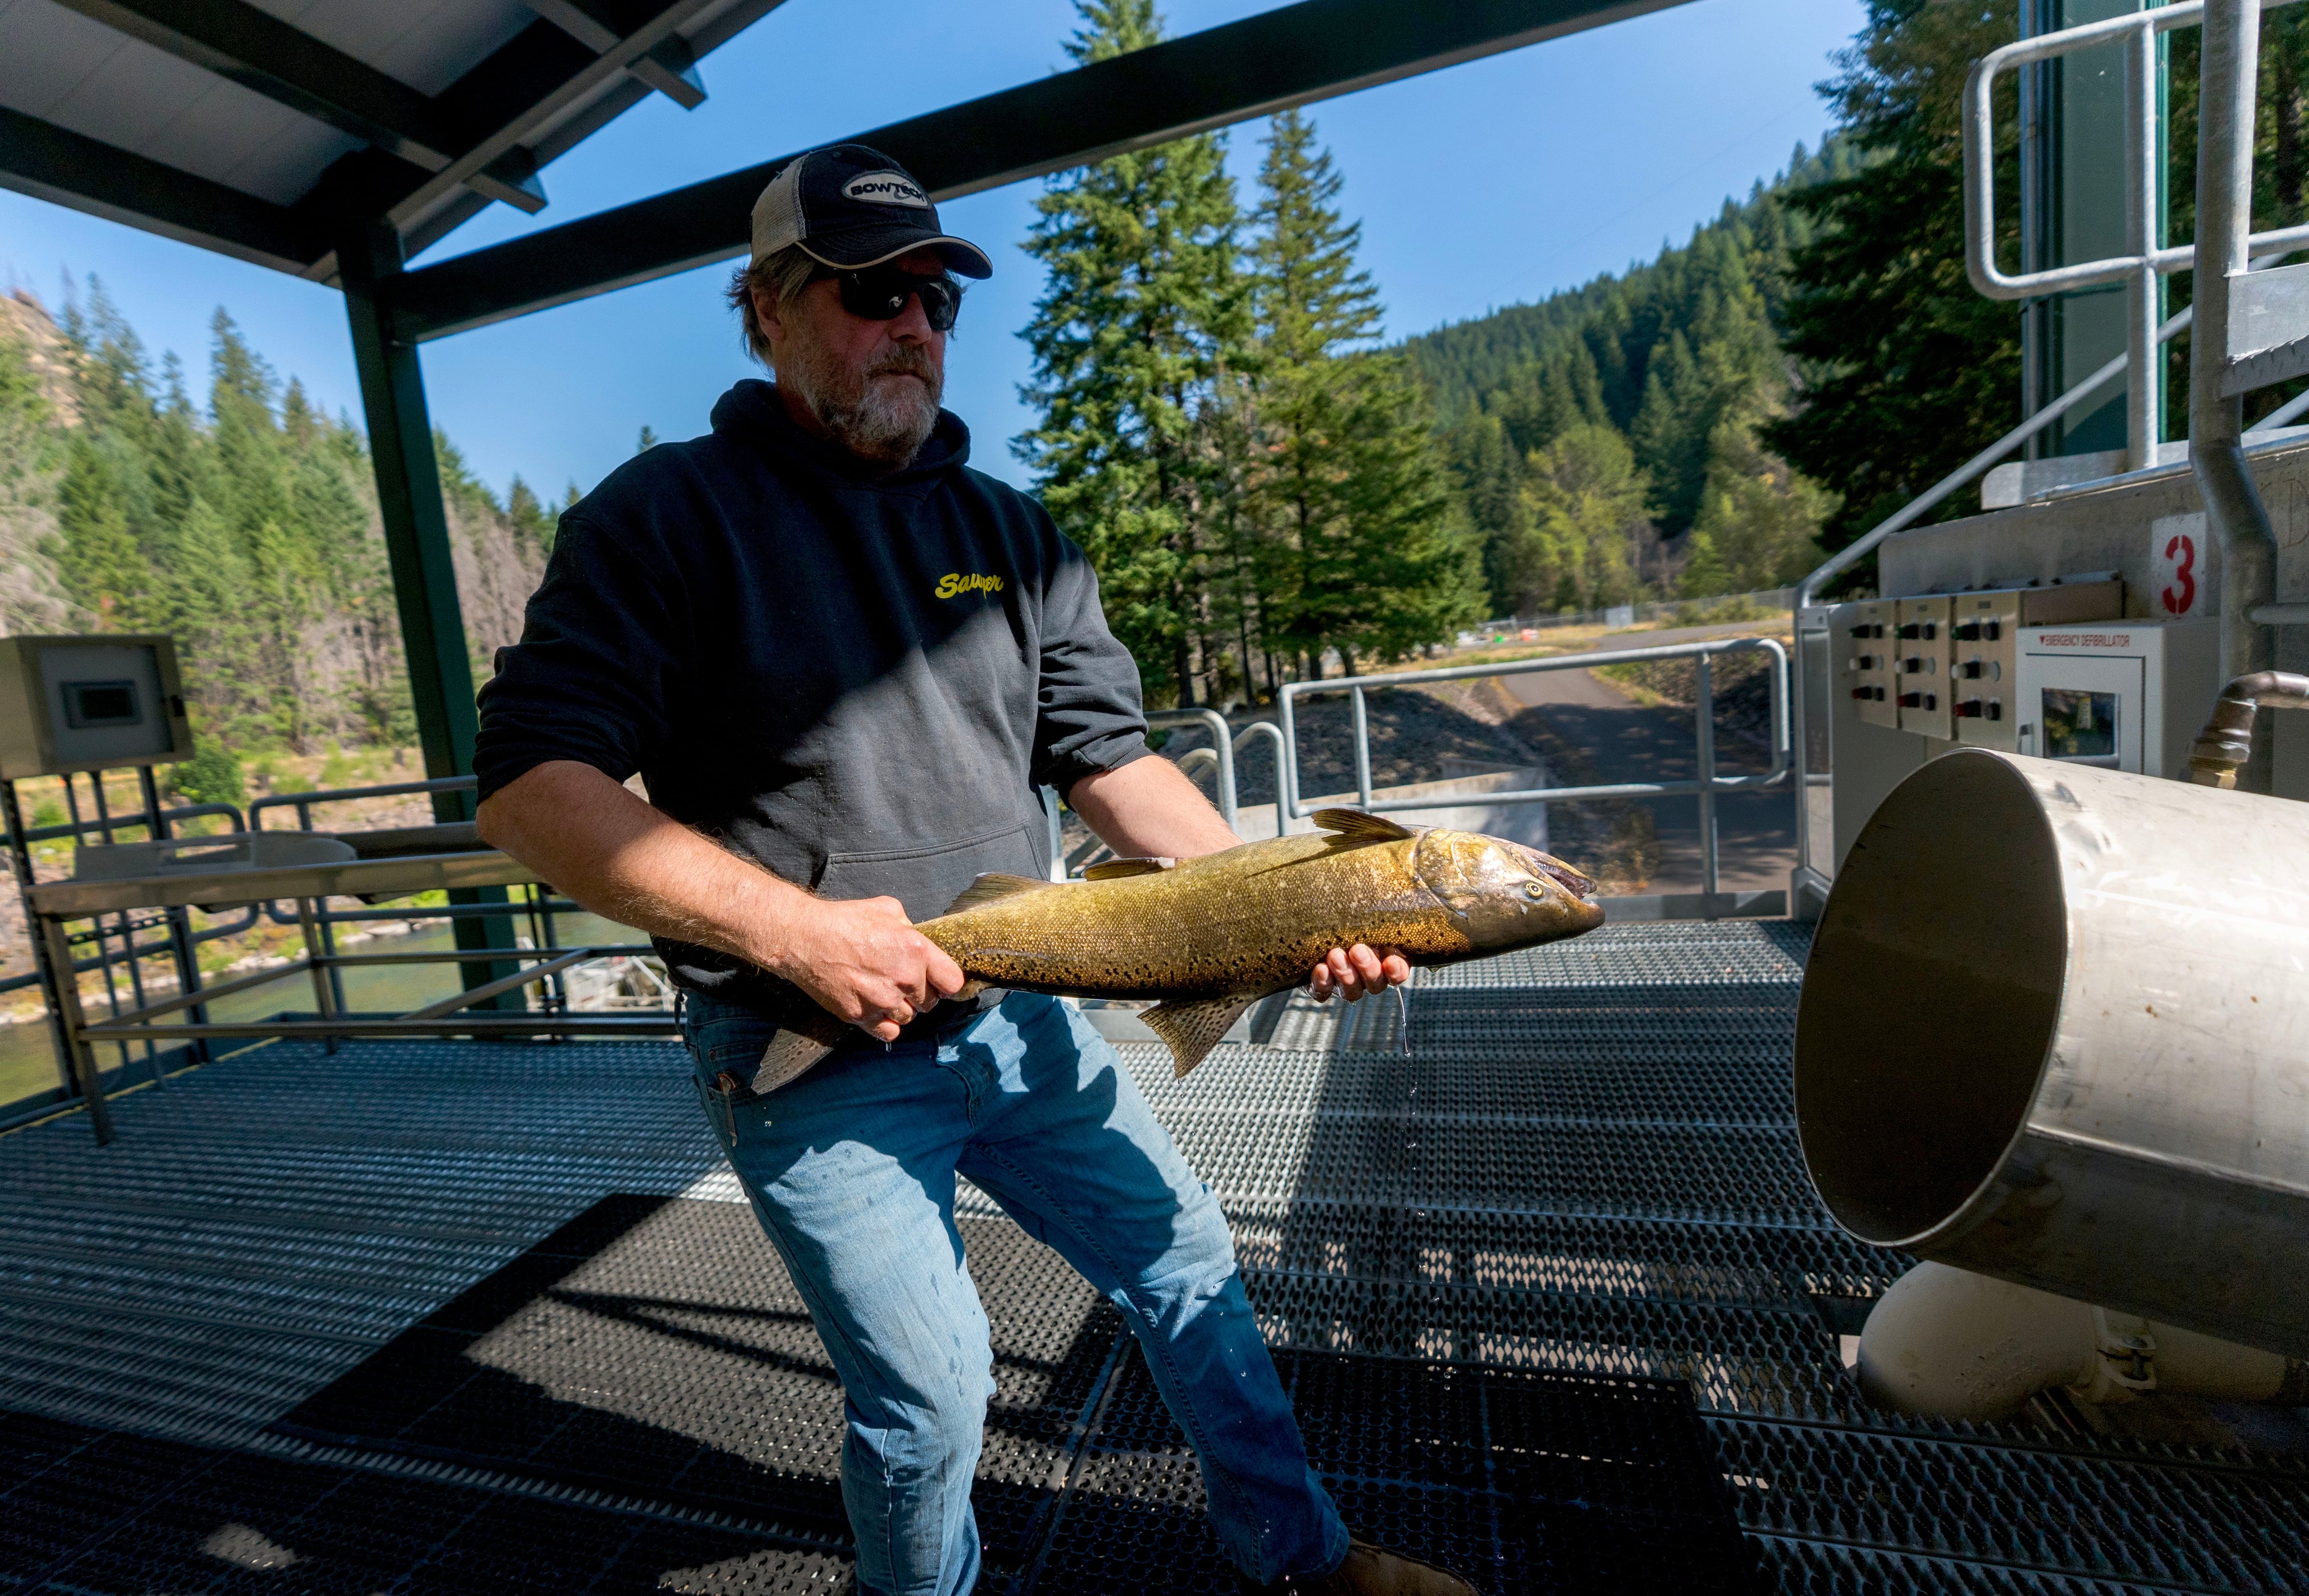 Killing salmon to lose money': A costly, questionable plan on the